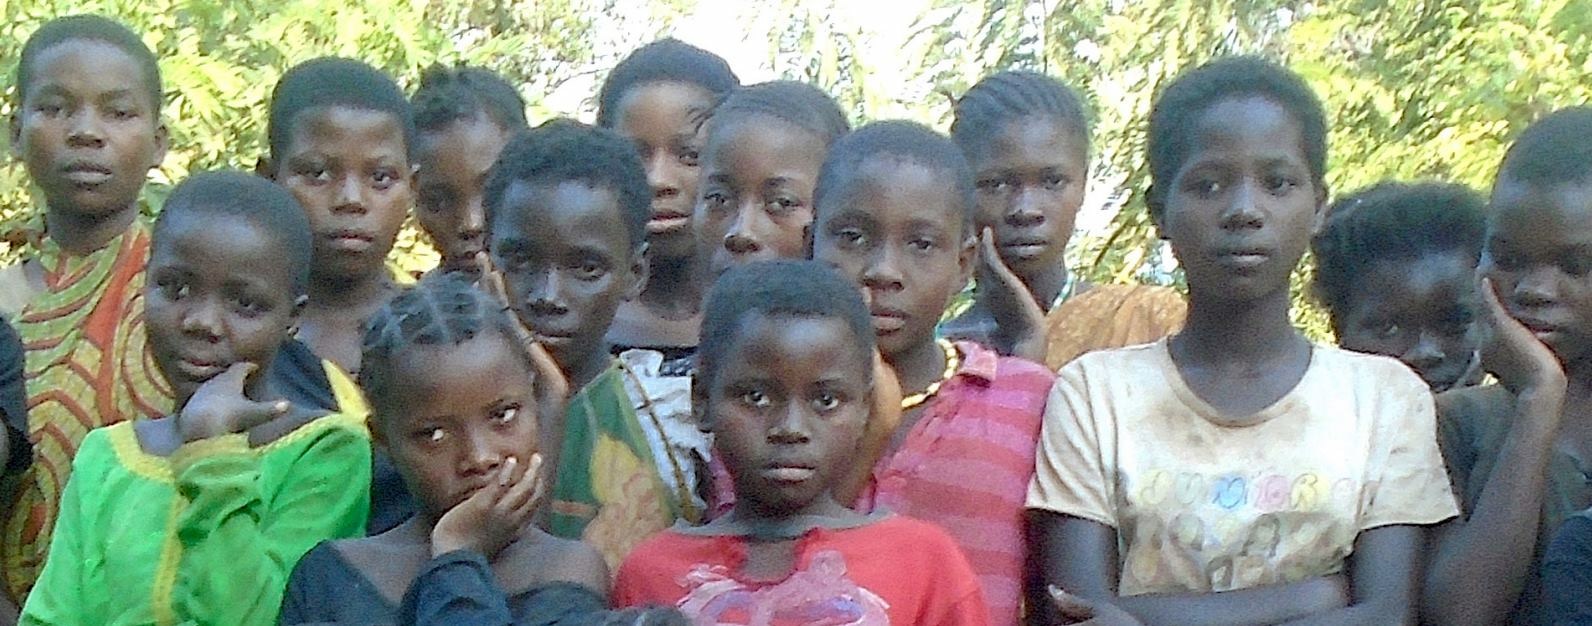   DEMOCRATIC REPUBLIC OF THE CONGO: ASSISTING GIRLS ACCUSED OF WITCHCRAFT  